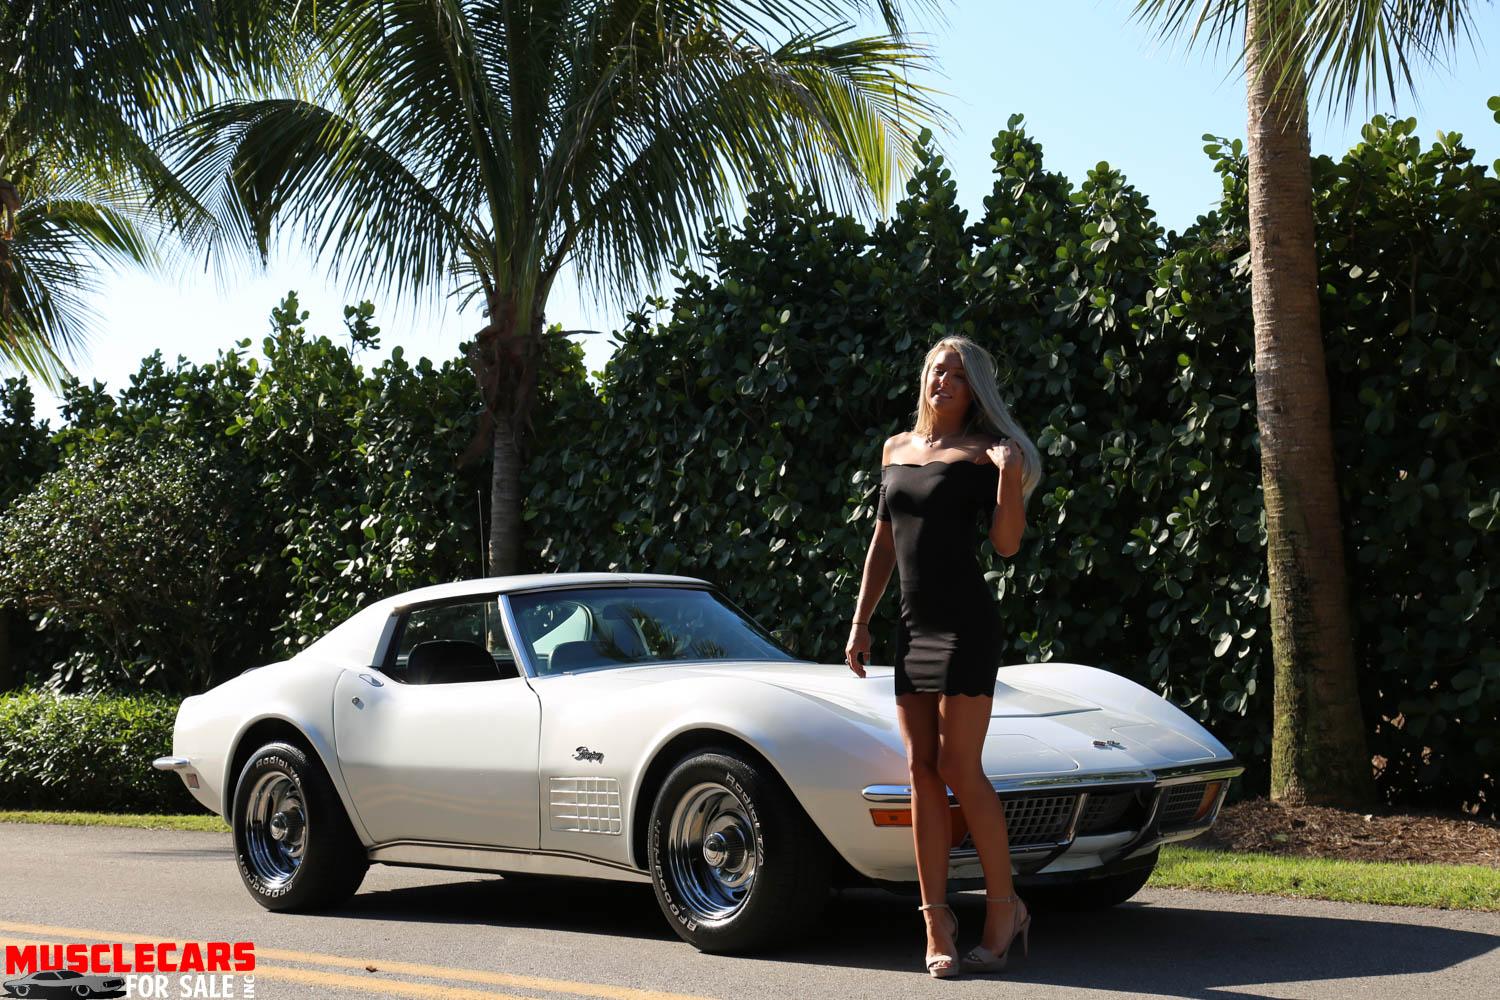 Used 1972 Chevrolet Corvette For Sale ($24,900) | Muscle Cars for Sale